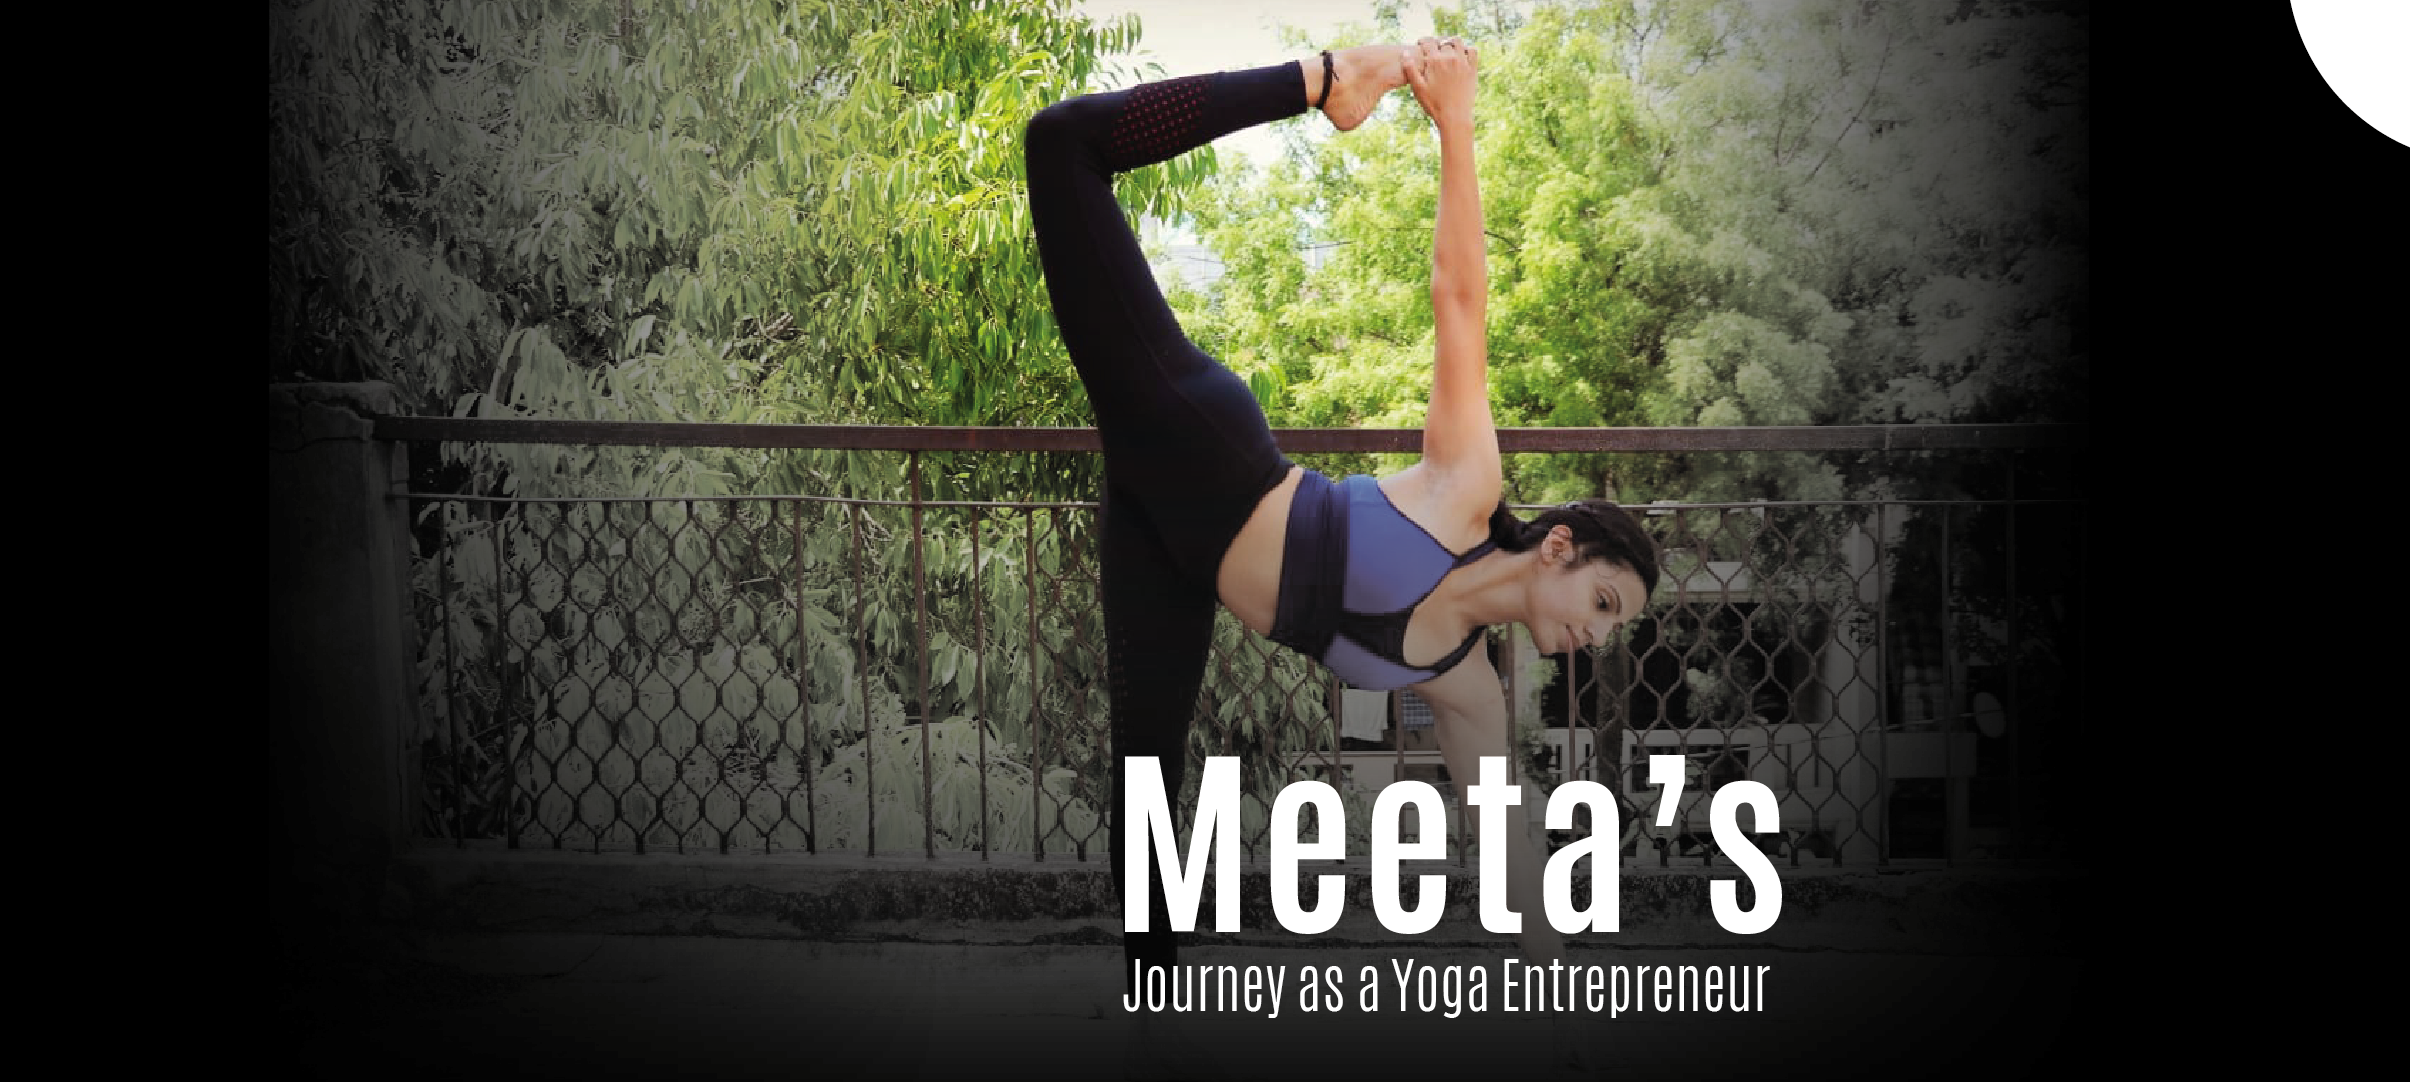 Meeta's journey from dance to yoga has been one with challenges.